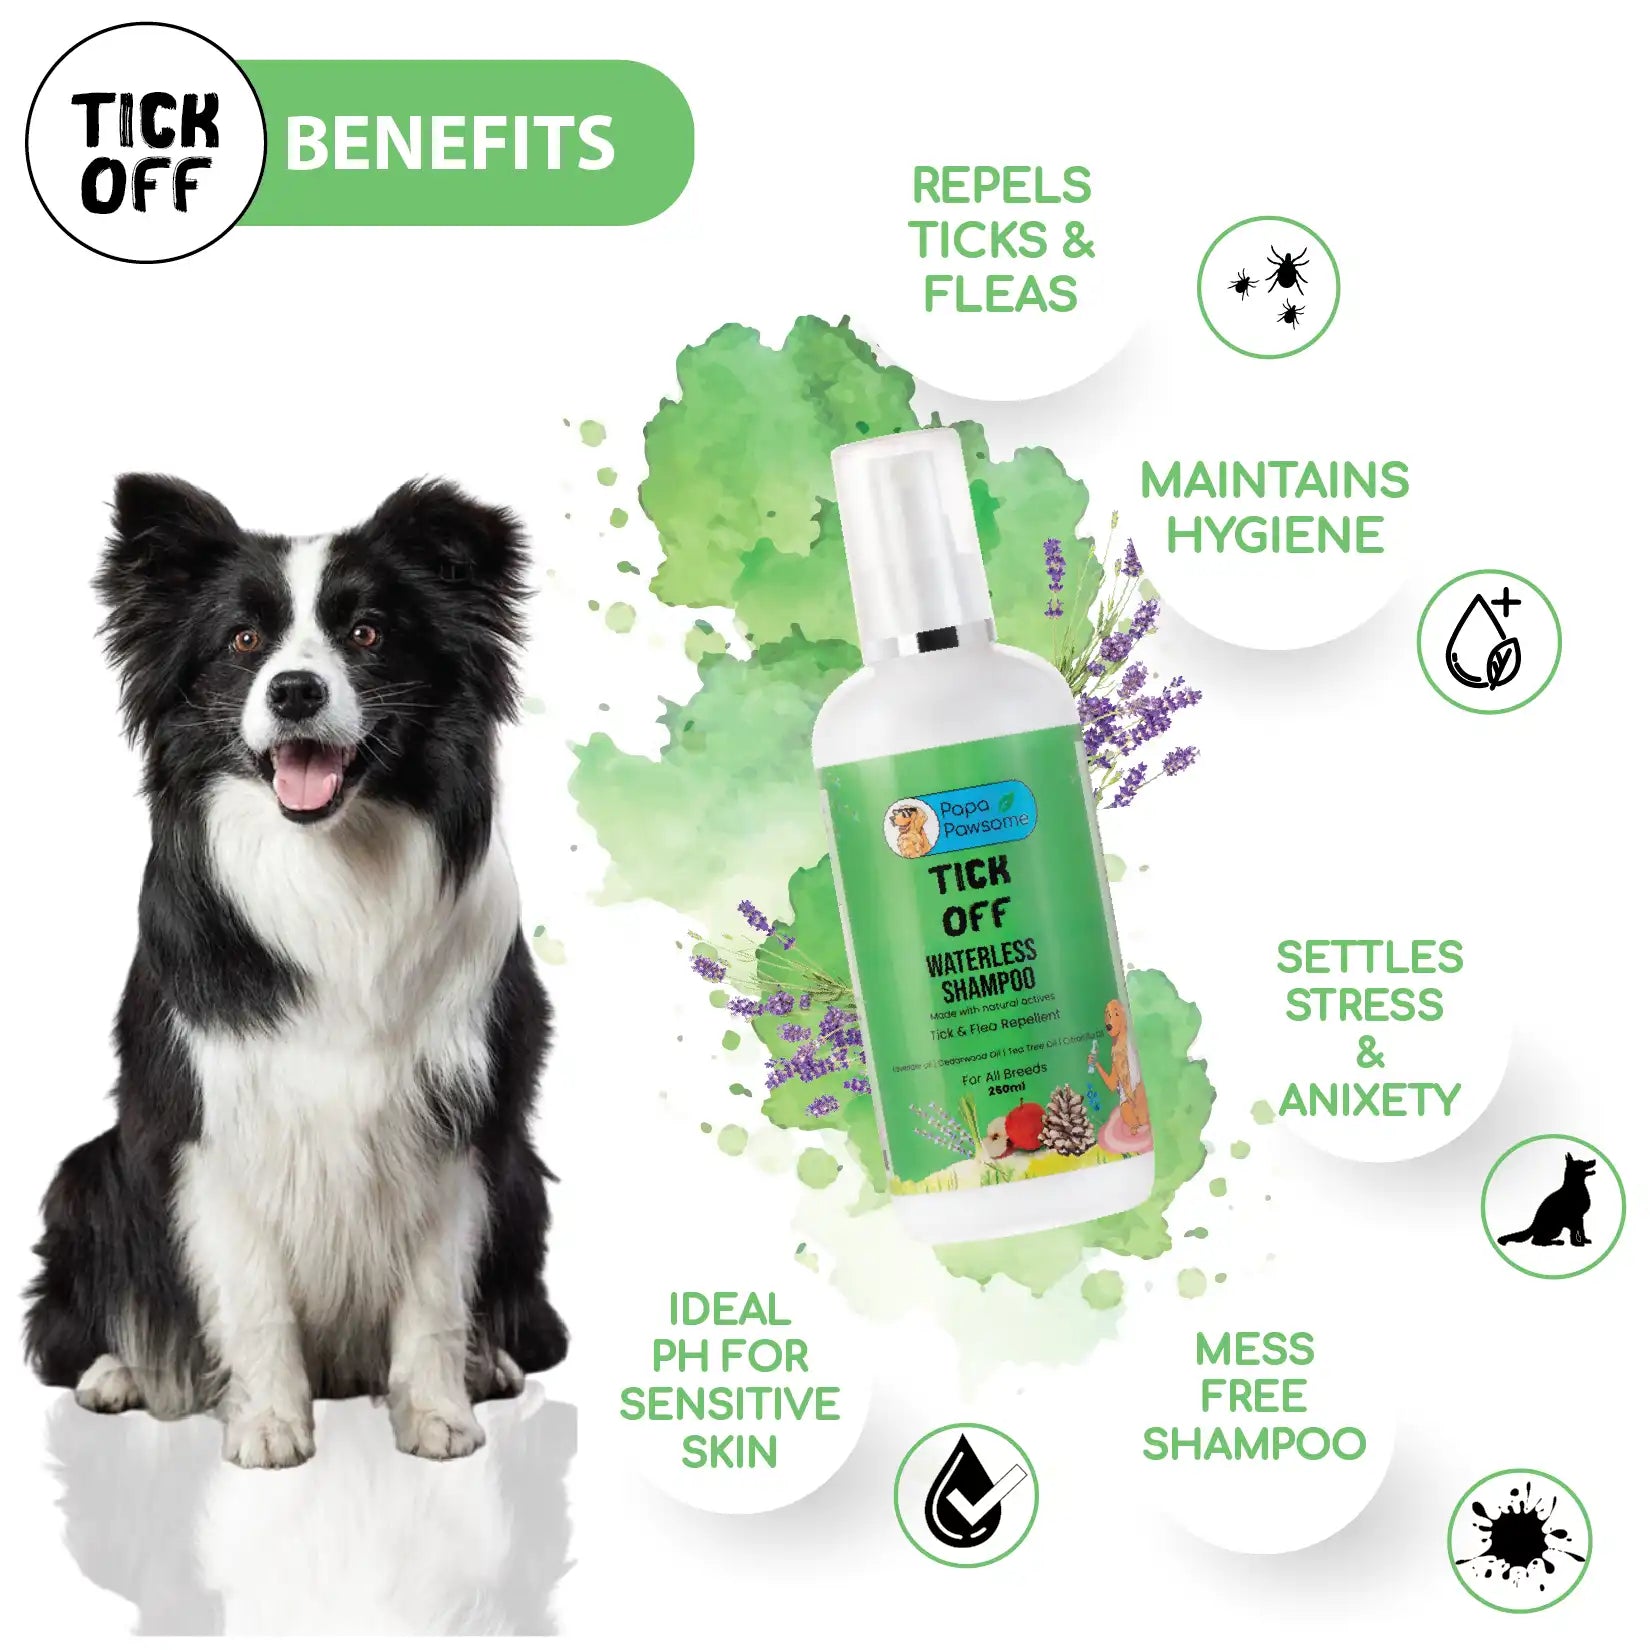 Benefits of dog waterless shampoo: repelling ticks and fleas, maintaining hygiene, settling stress and anxiety, mess-free shampoo, and ideal pH for sensitive skin